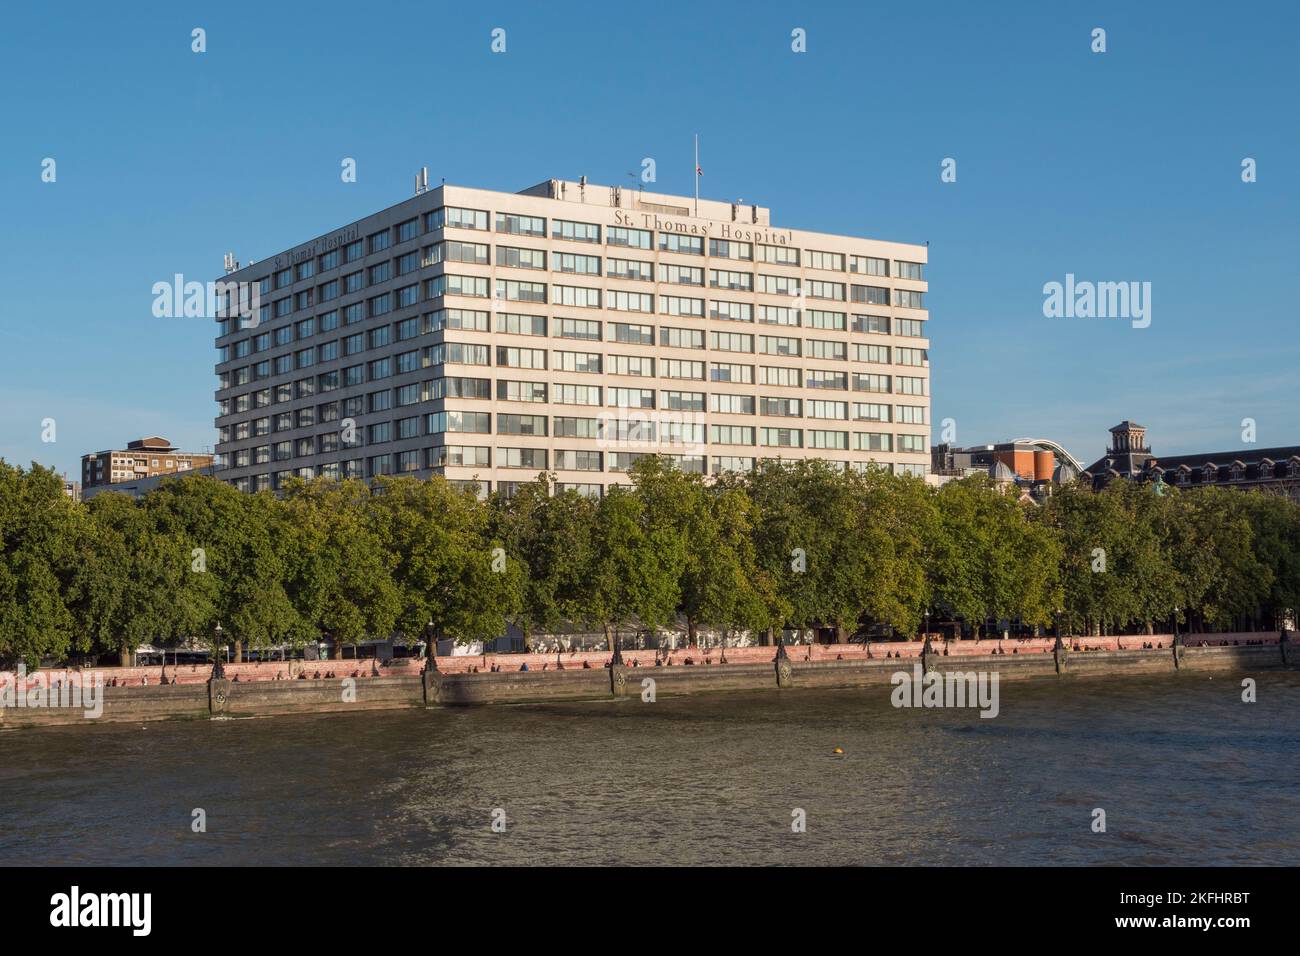 St Thomas' Hospital, part of Guy's and St Thomas' NHS Foundation Trust on the south bank of the River Thames, London, UK. Stock Photo